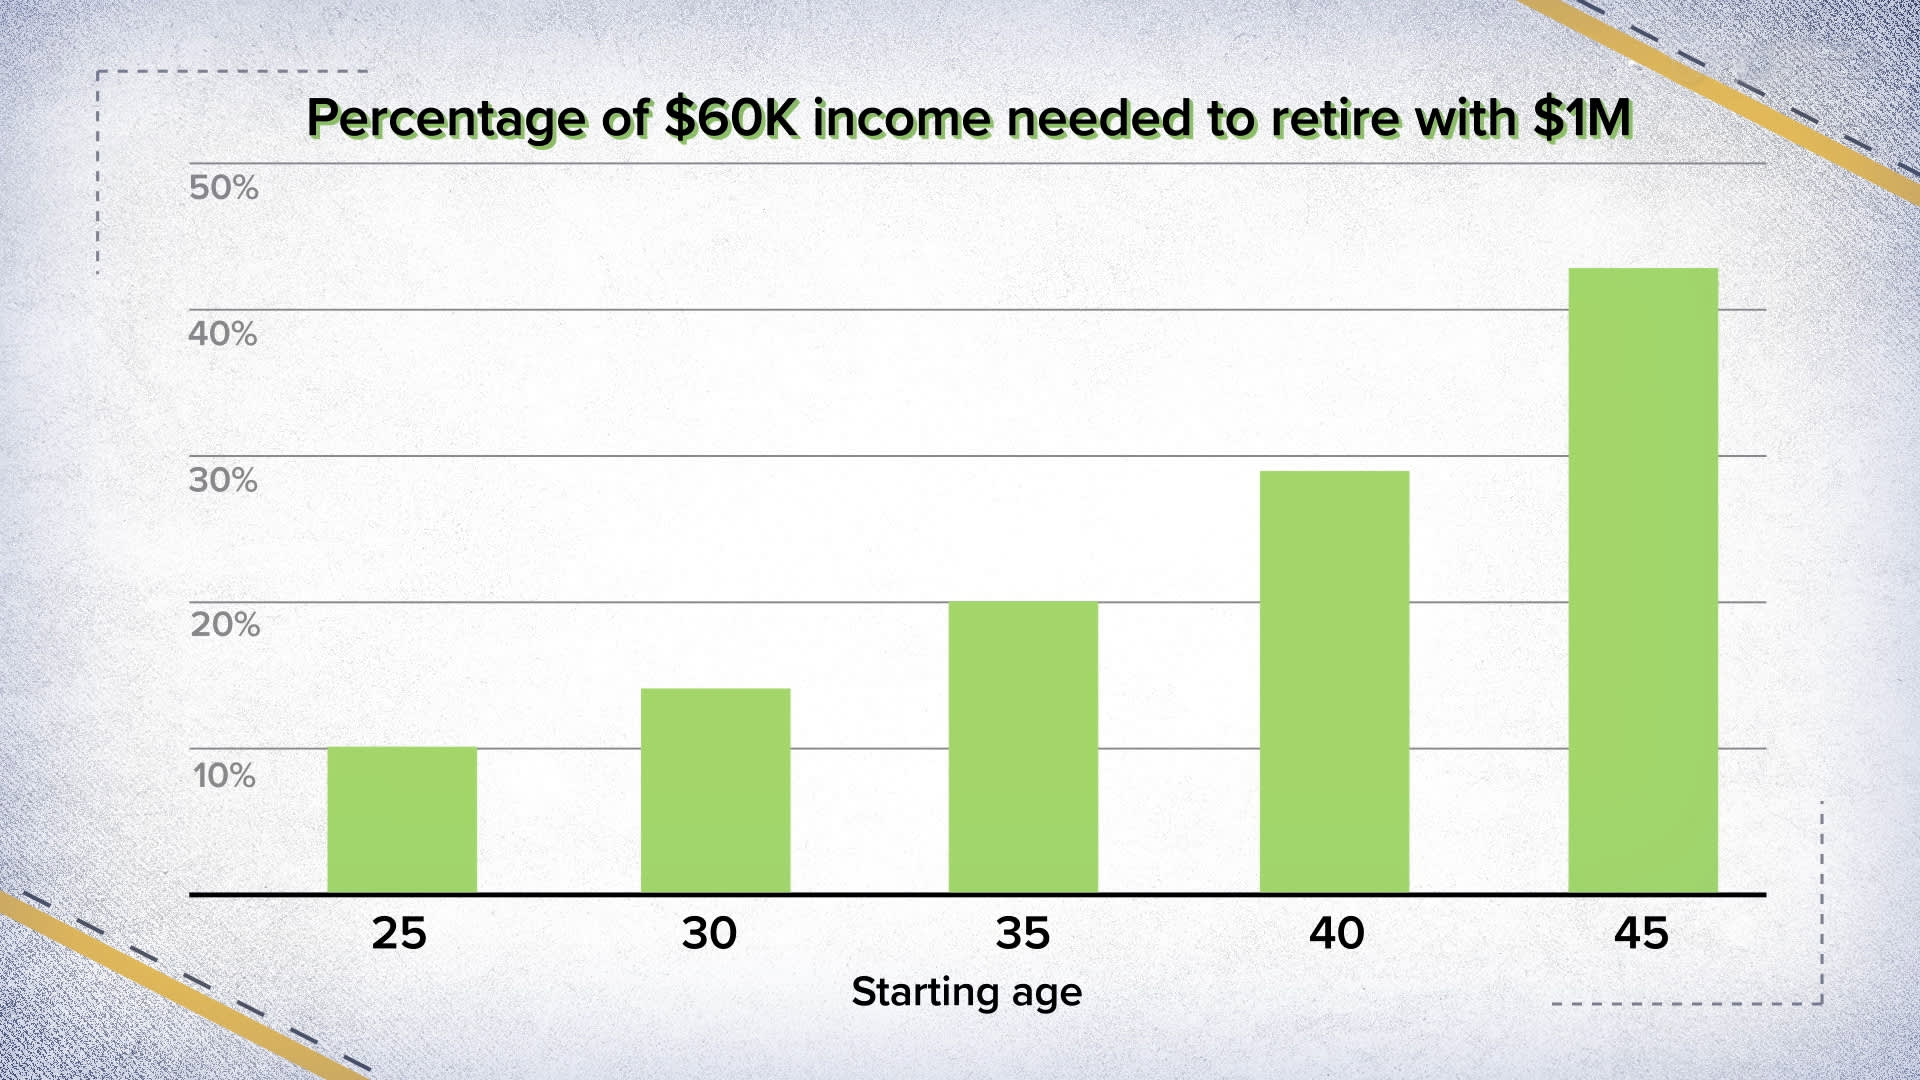 How to save $1 million for retirement if you make $60,000 a year